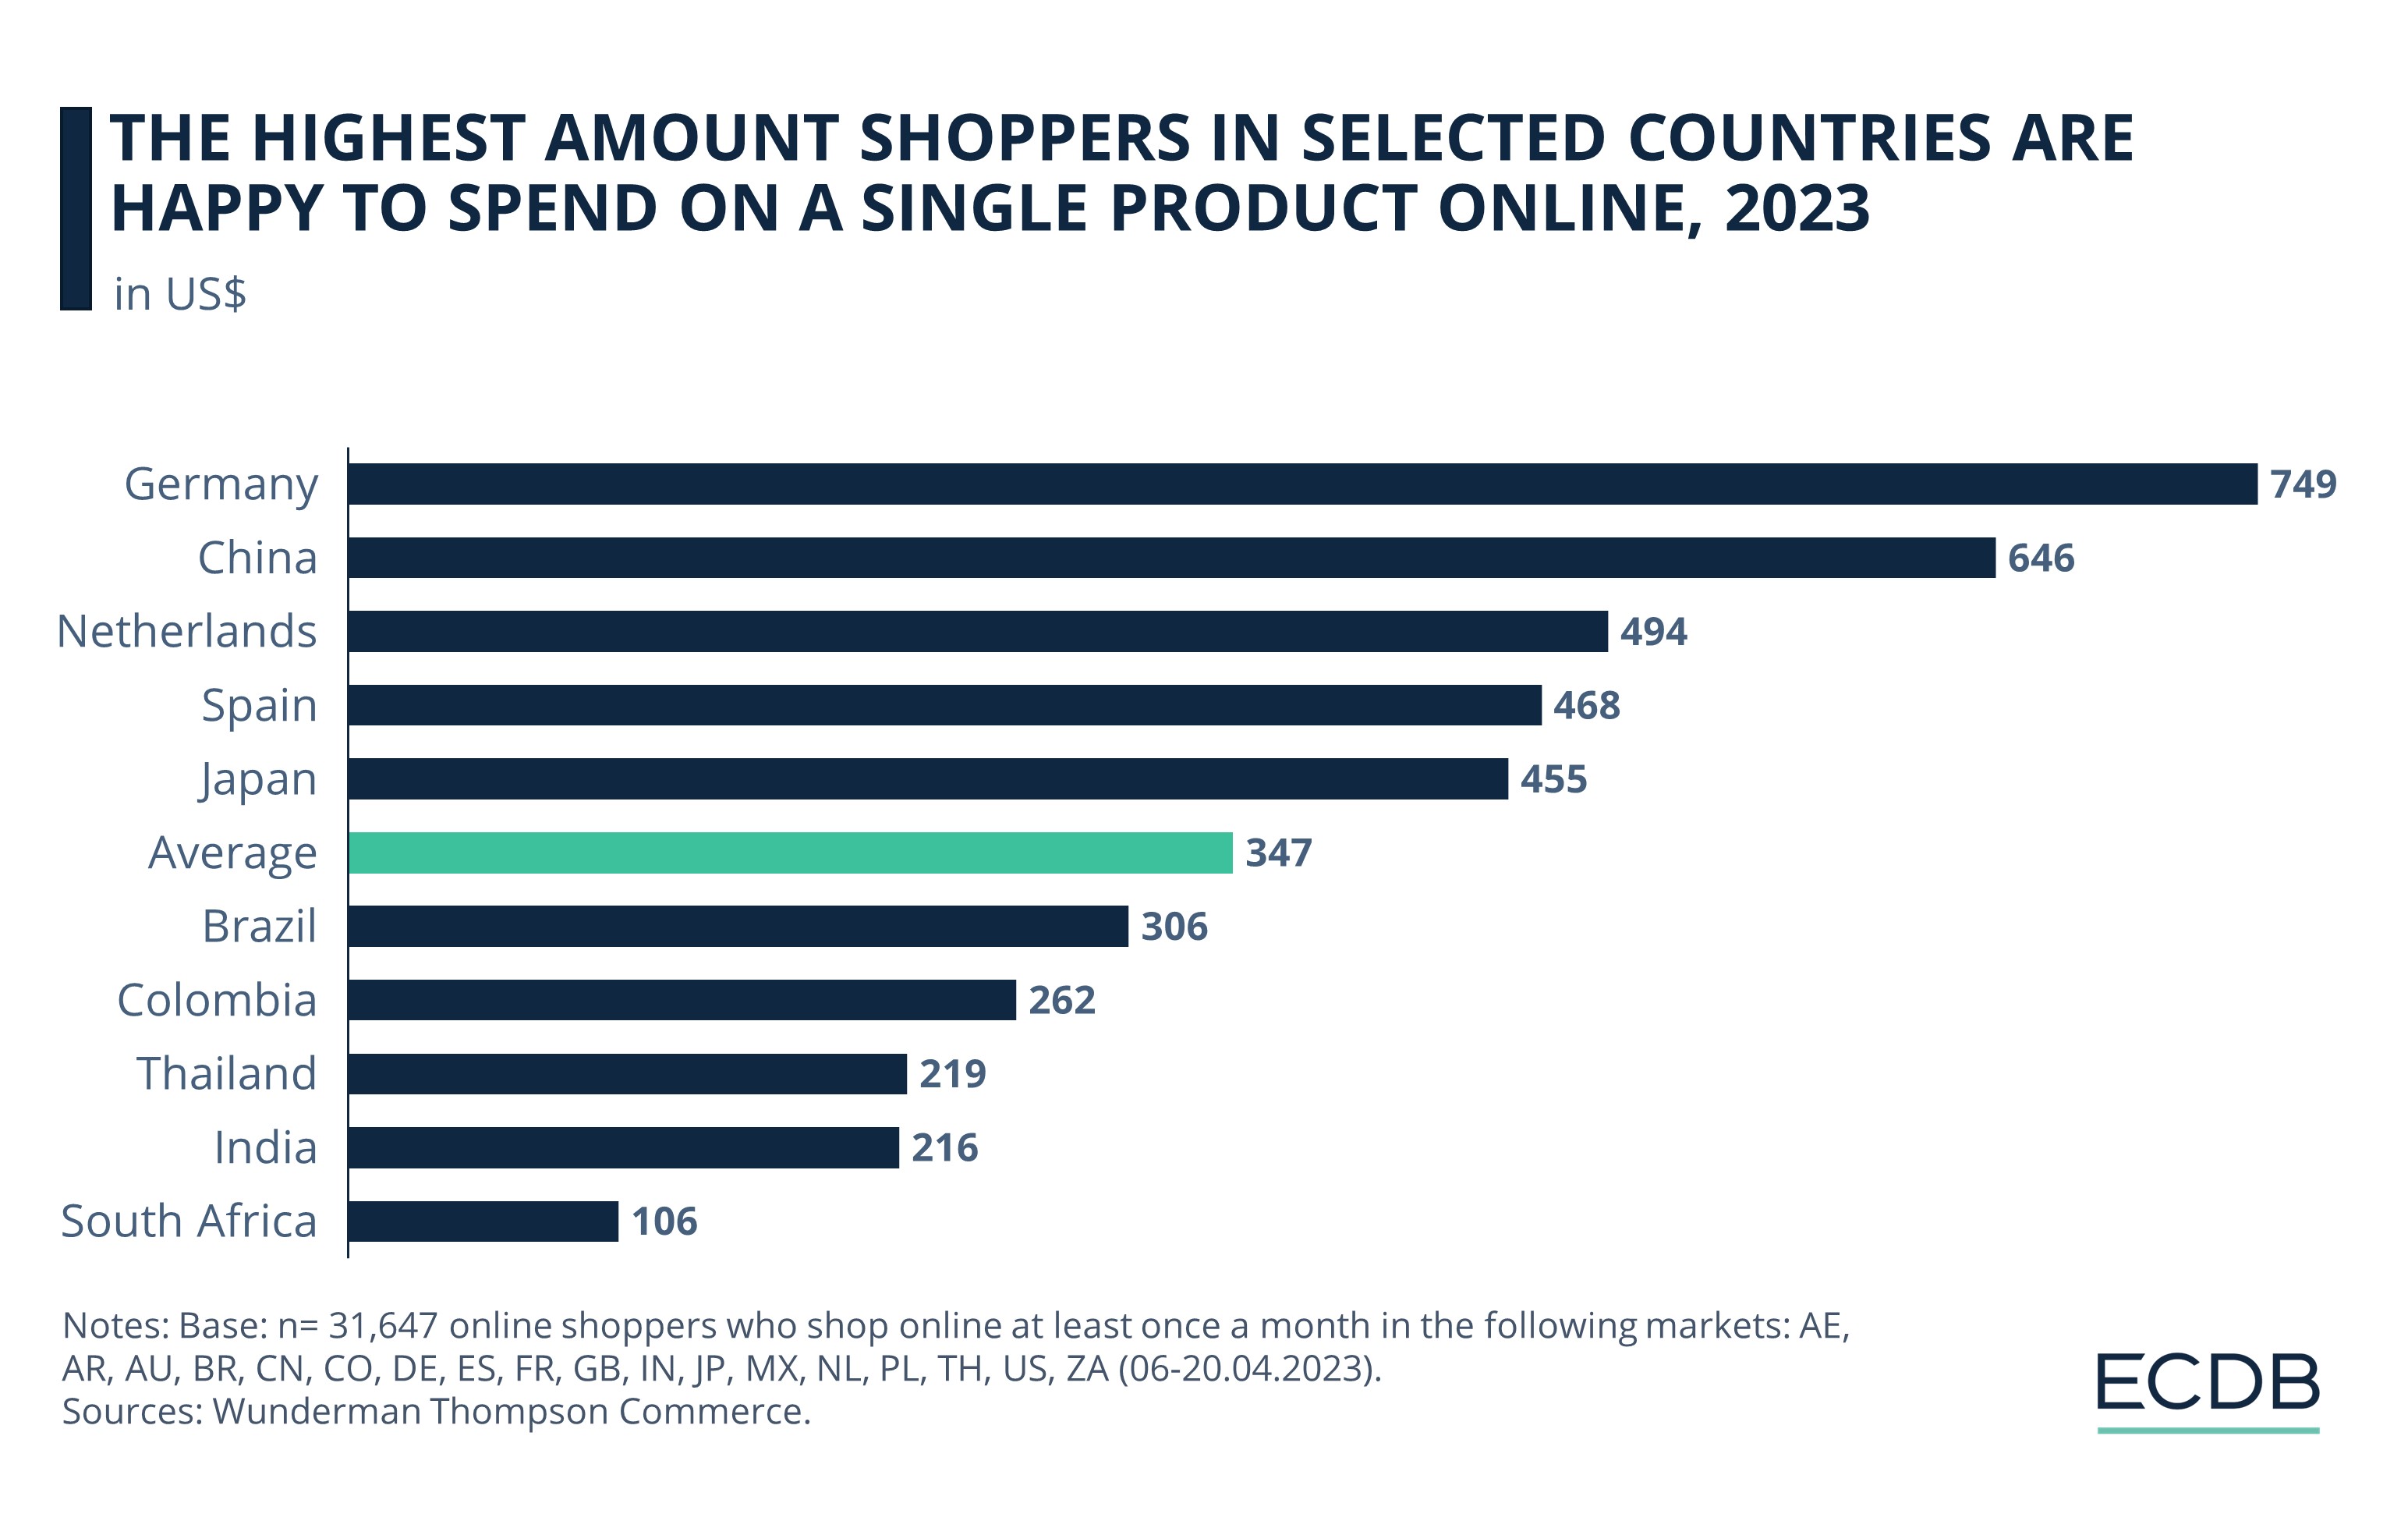 The Highest Amount Shoppes in Selected Countries are Happy to Spend on a Single Product Online, 2023